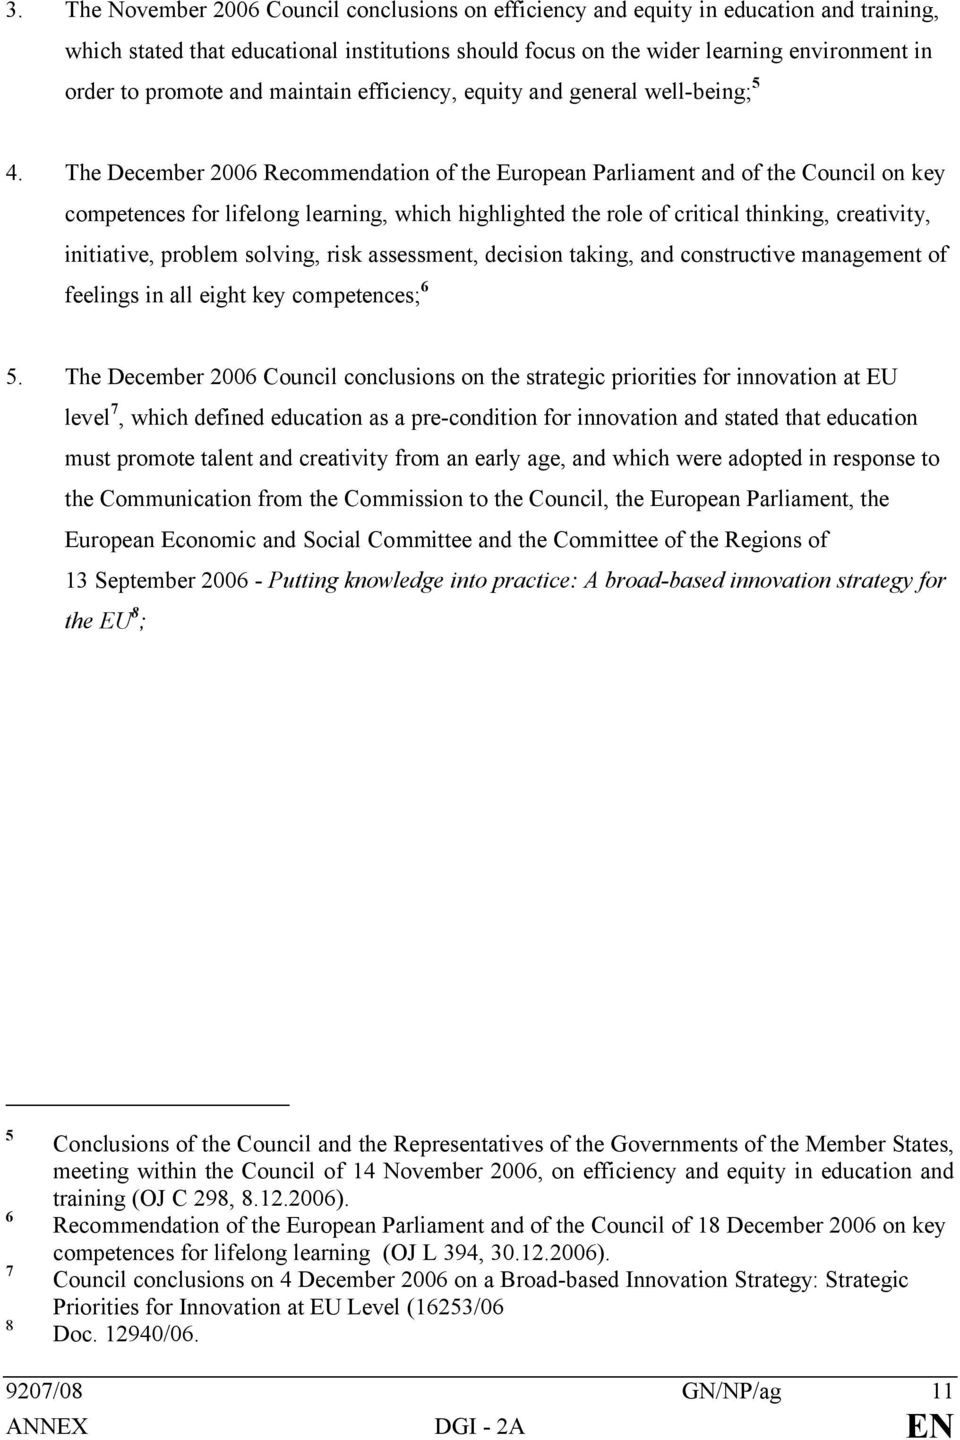 The December 2006 Recommendation of the European Parliament and of the Council on key competences for lifelong learning, which highlighted the role of critical thinking, creativity, initiative,